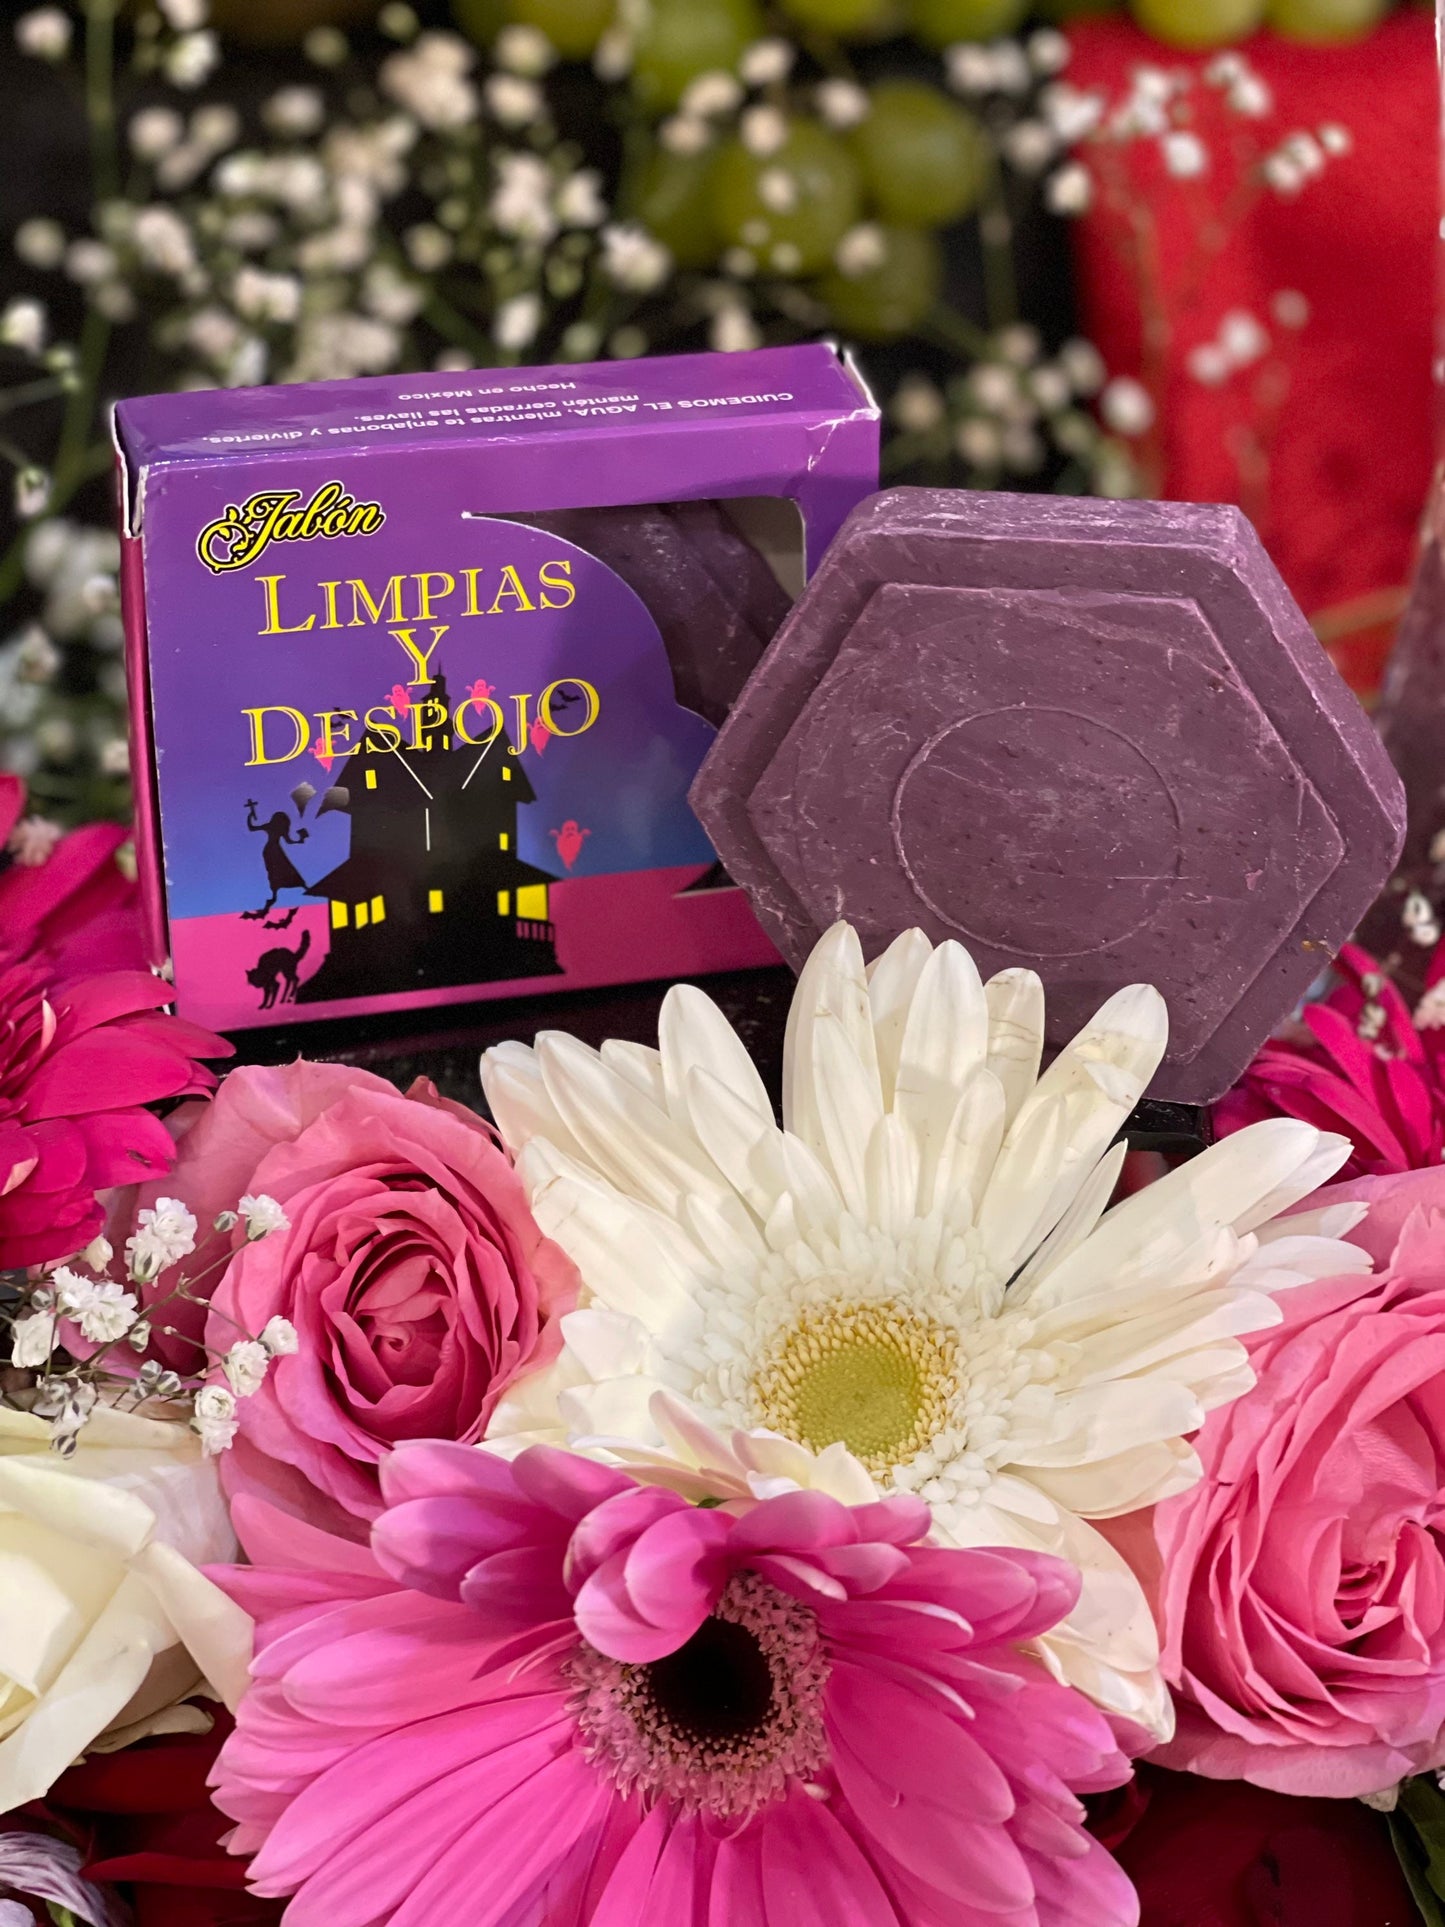 Limpias y Despojo Soap + Cleansing + Uncrossing + Scented + Jabon + Made in Mexico